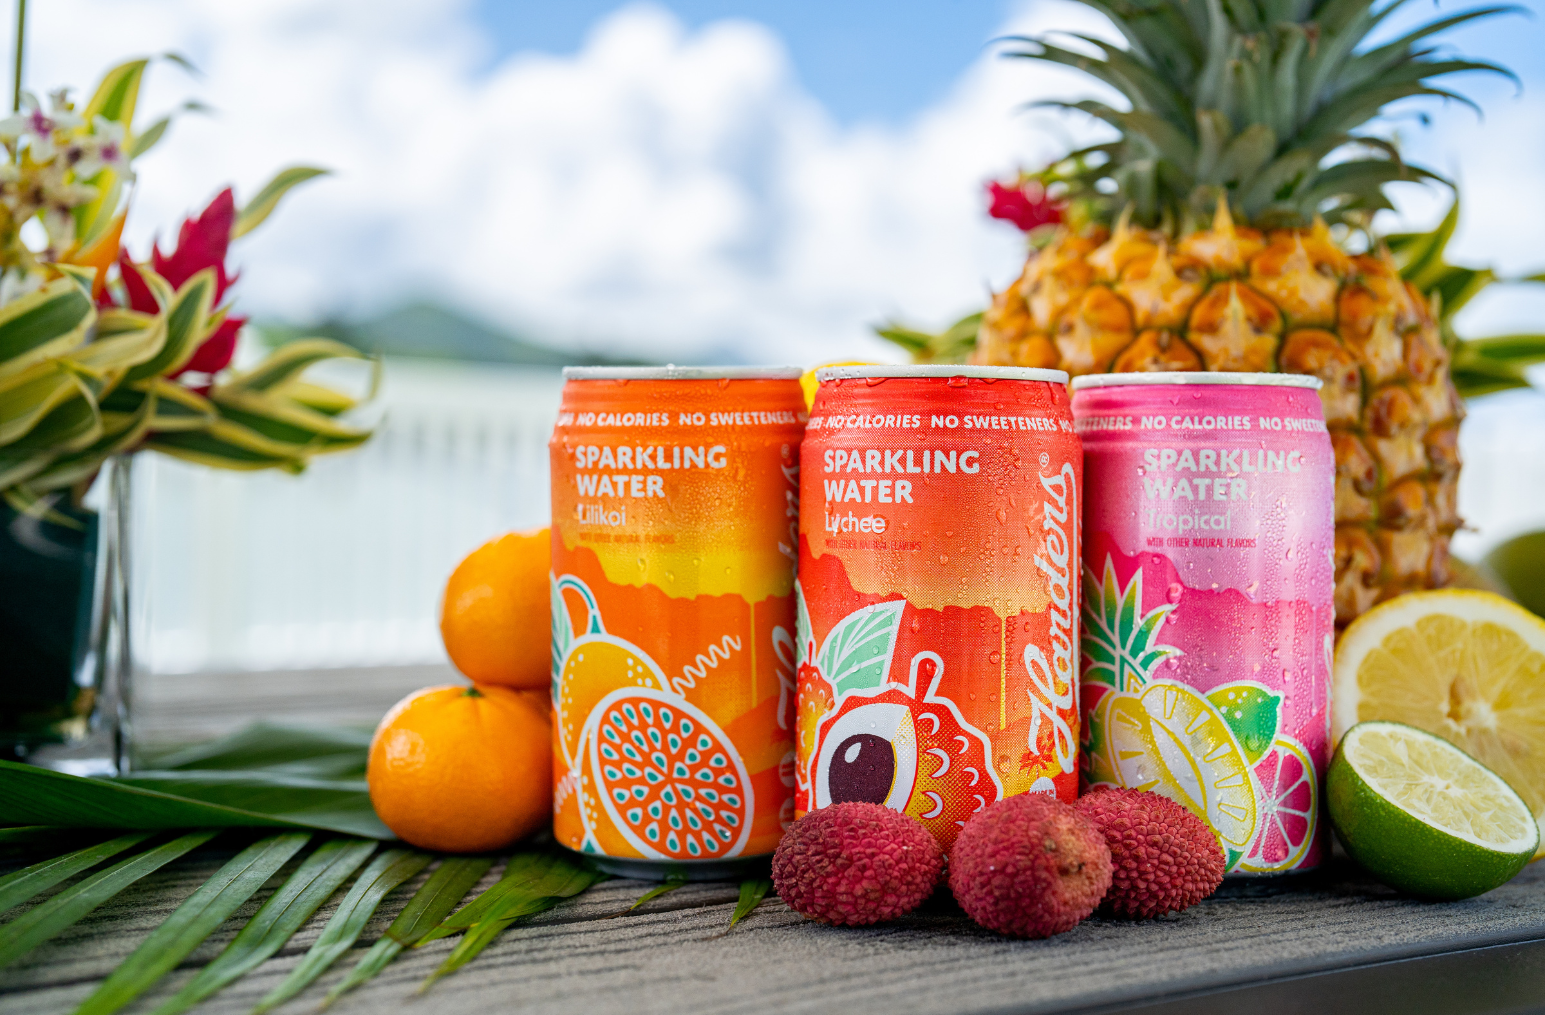 Sparkling Water Variety 6 Pack (FREE U.S. SHIPPING)